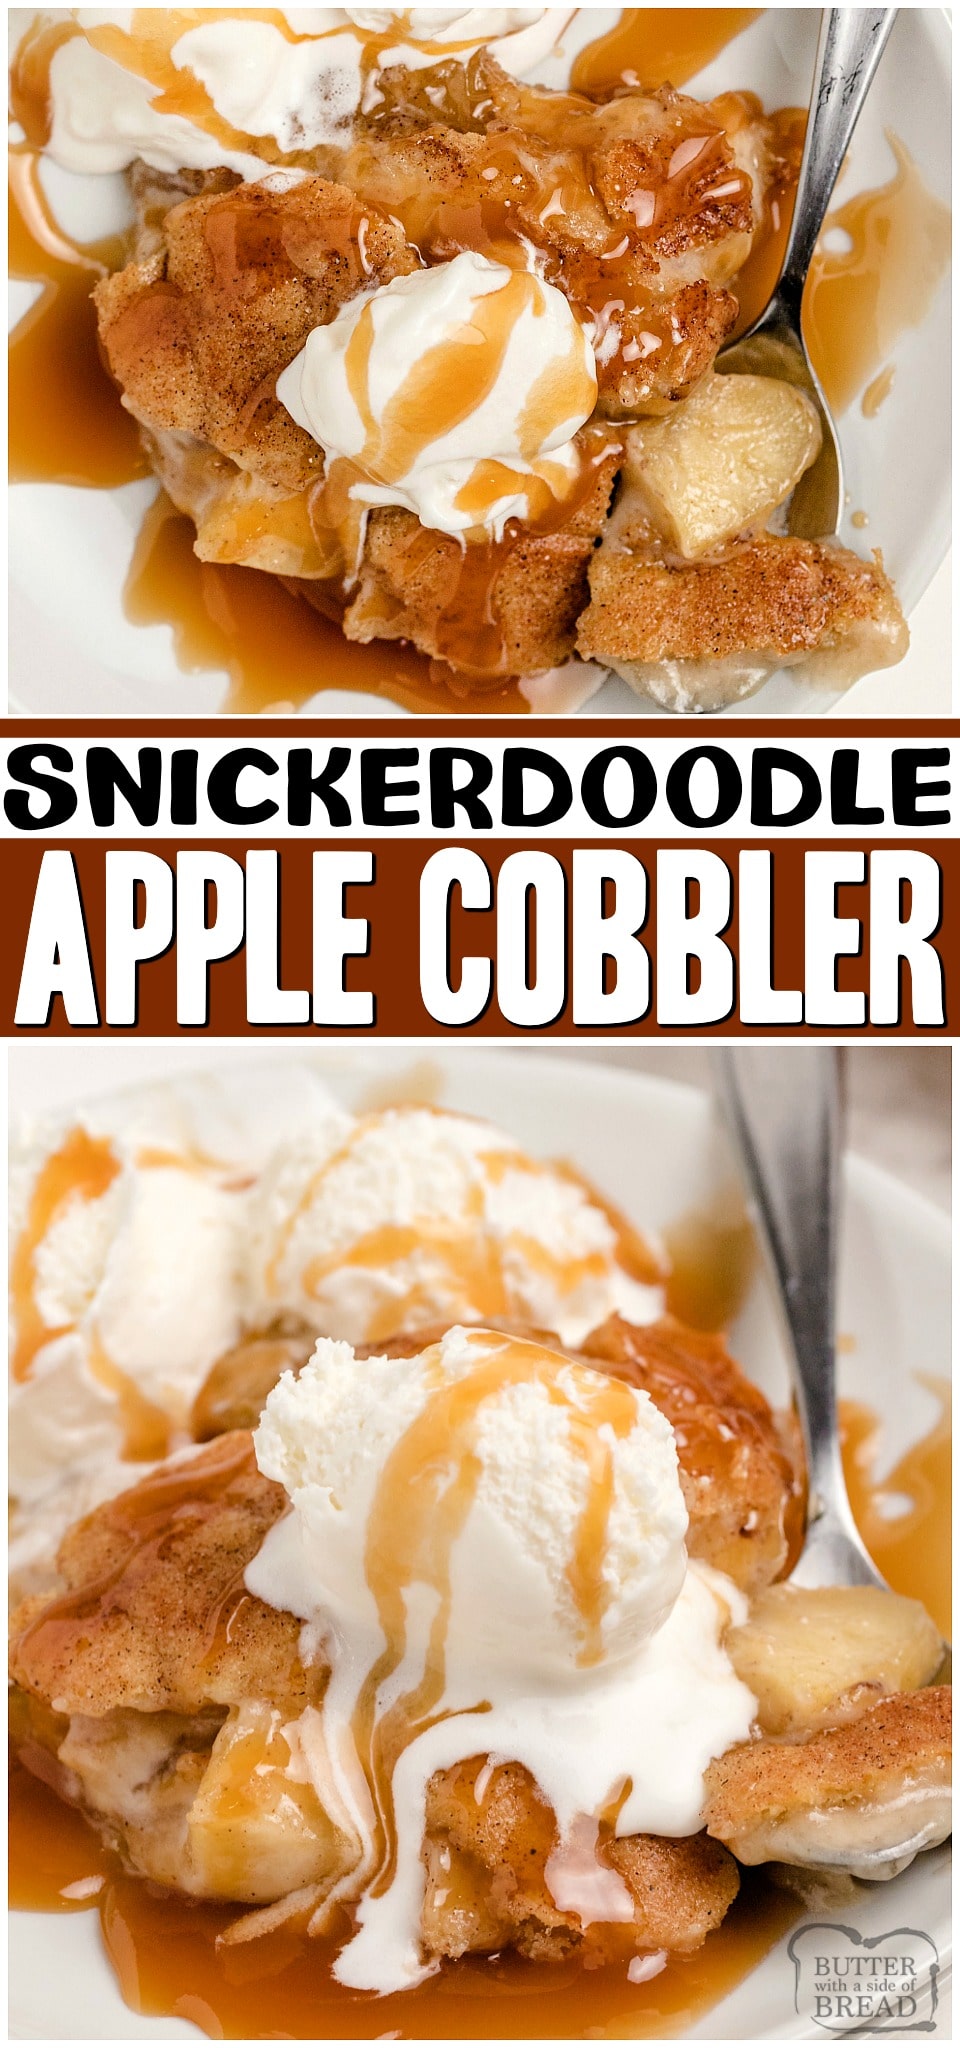 Snickerdoodle Apple Cobbler is a tasty twist on a delicious apple cobbler. Sweet apple pie filling baked between layers of with Snickerdoodle cookie dough then topped with caramel drizzle and vanilla ice cream! #Snickerdoodle #apples #applecobbler #cobbler #dessert #baking #recipe from BUTTER WITH A SIDE OF BREAD